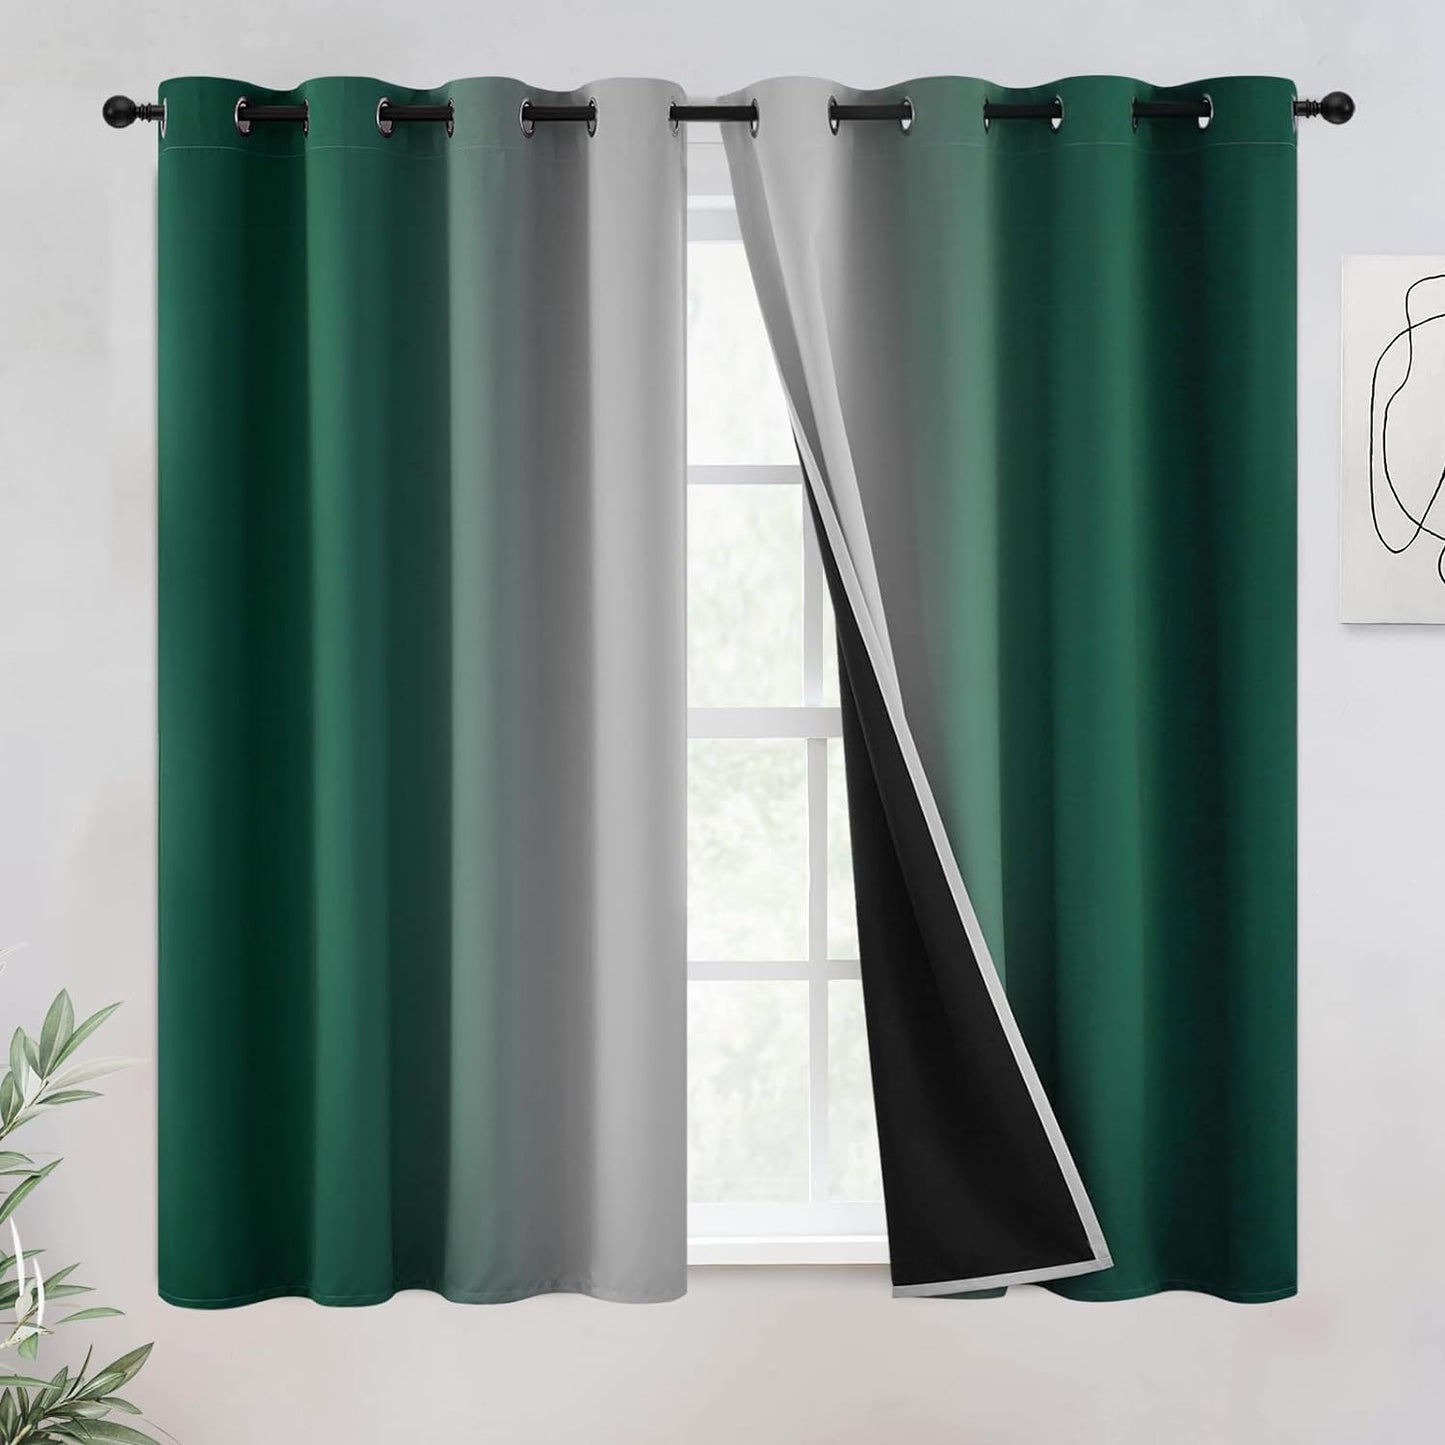 COSVIYA 100% Blackout Curtains & Drapes Ombre Purple Curtains 63 Inch Length 2 Panels,Full Room Darkening Grommet Gradient Insulated Thermal Window Curtains for Bedroom/Living Room,52X63 Inches  COSVIYA Green To Greyish White 52W X 54L 